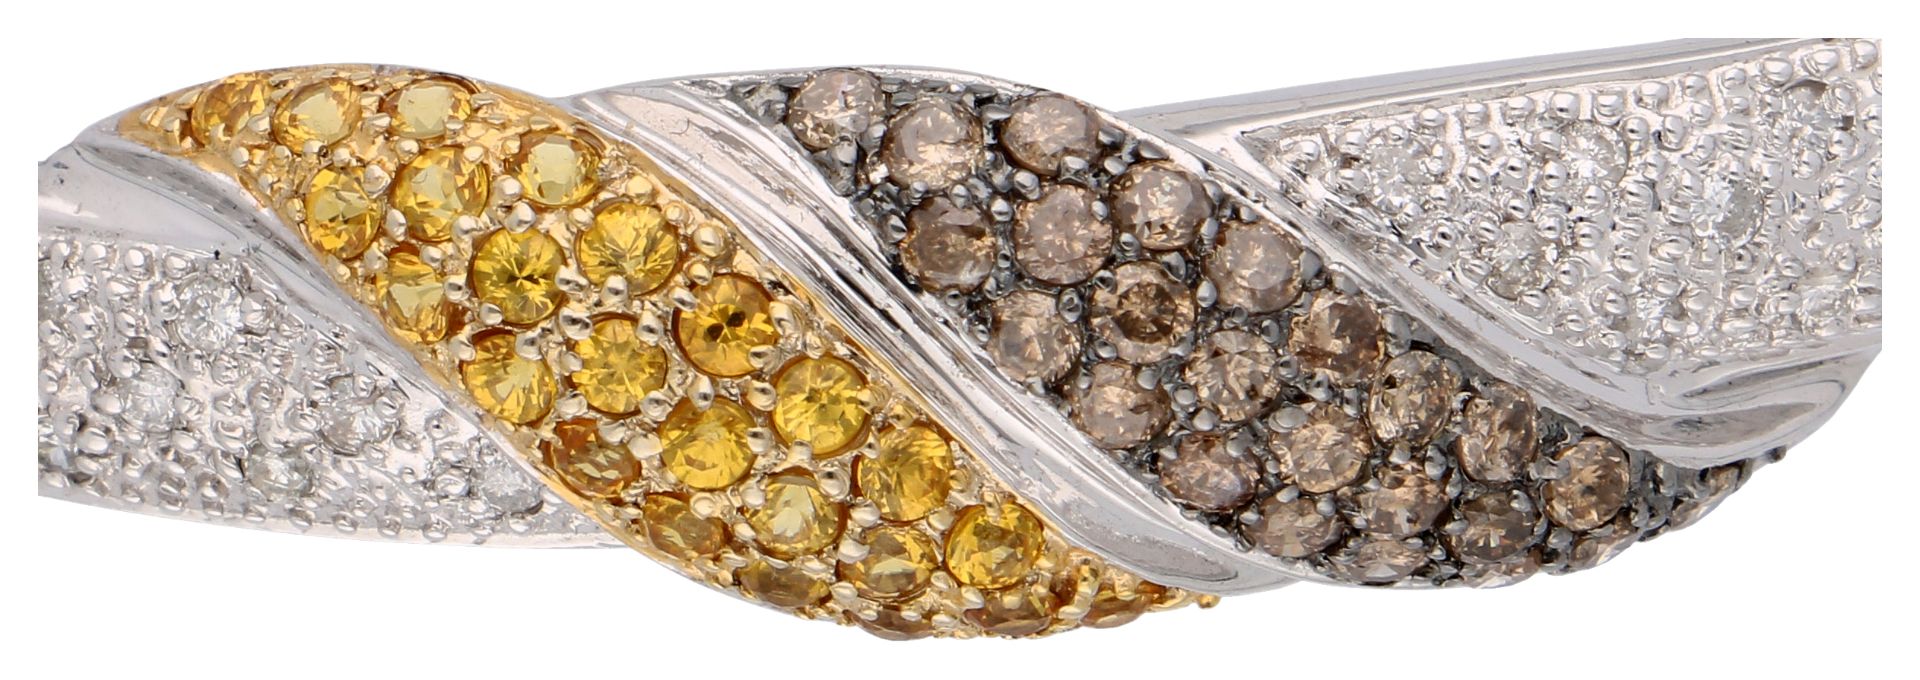 No Reserve - 14K White gold bangle bracelet set with yellow sapphire and approx. 0.68 ct. diamond. - Image 2 of 4